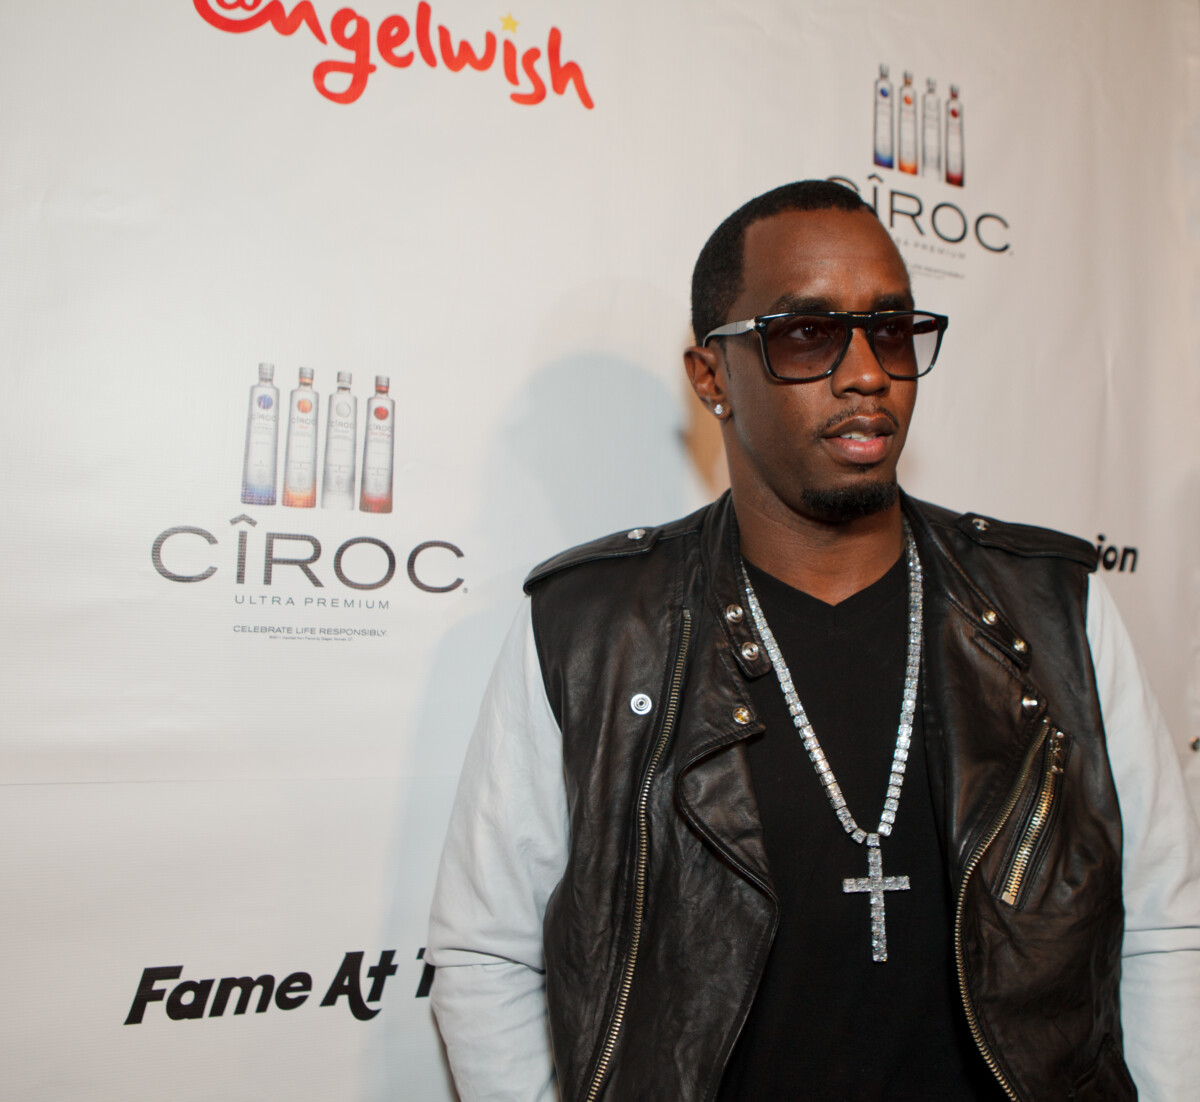 Celebrity Sean Diddy Combs sued by former male employee Rodney “Lil Rod”, claims multiple sexual assaults from Diddy, associates